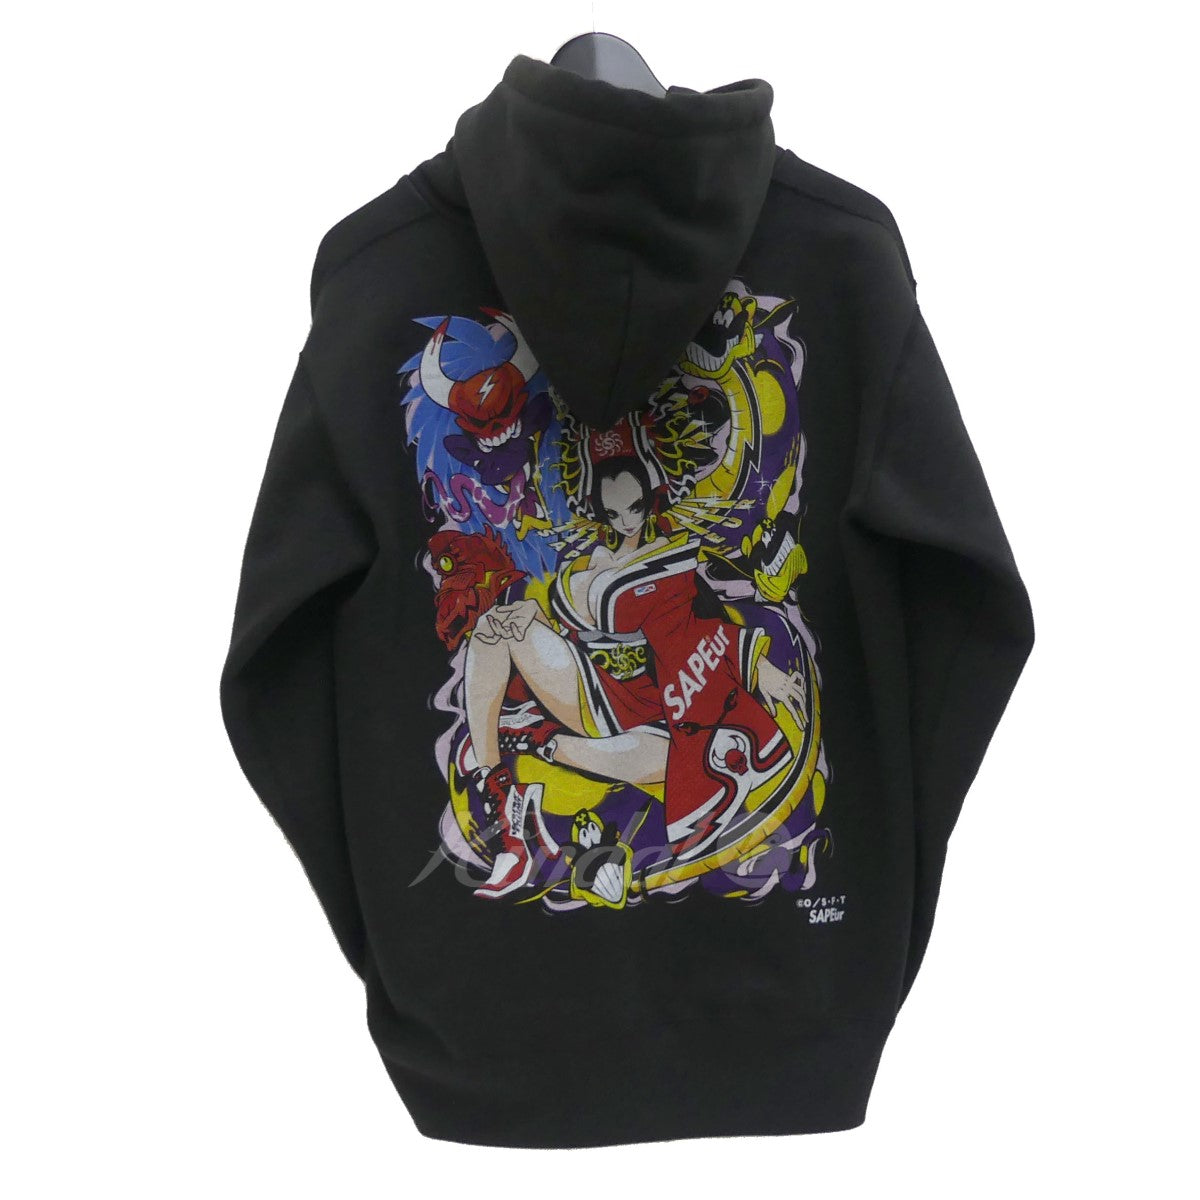 ONEPIECE×SAPEur(ワンピース×サプール) BOAHANCOCK HOODIE ボアハンコックパーカー